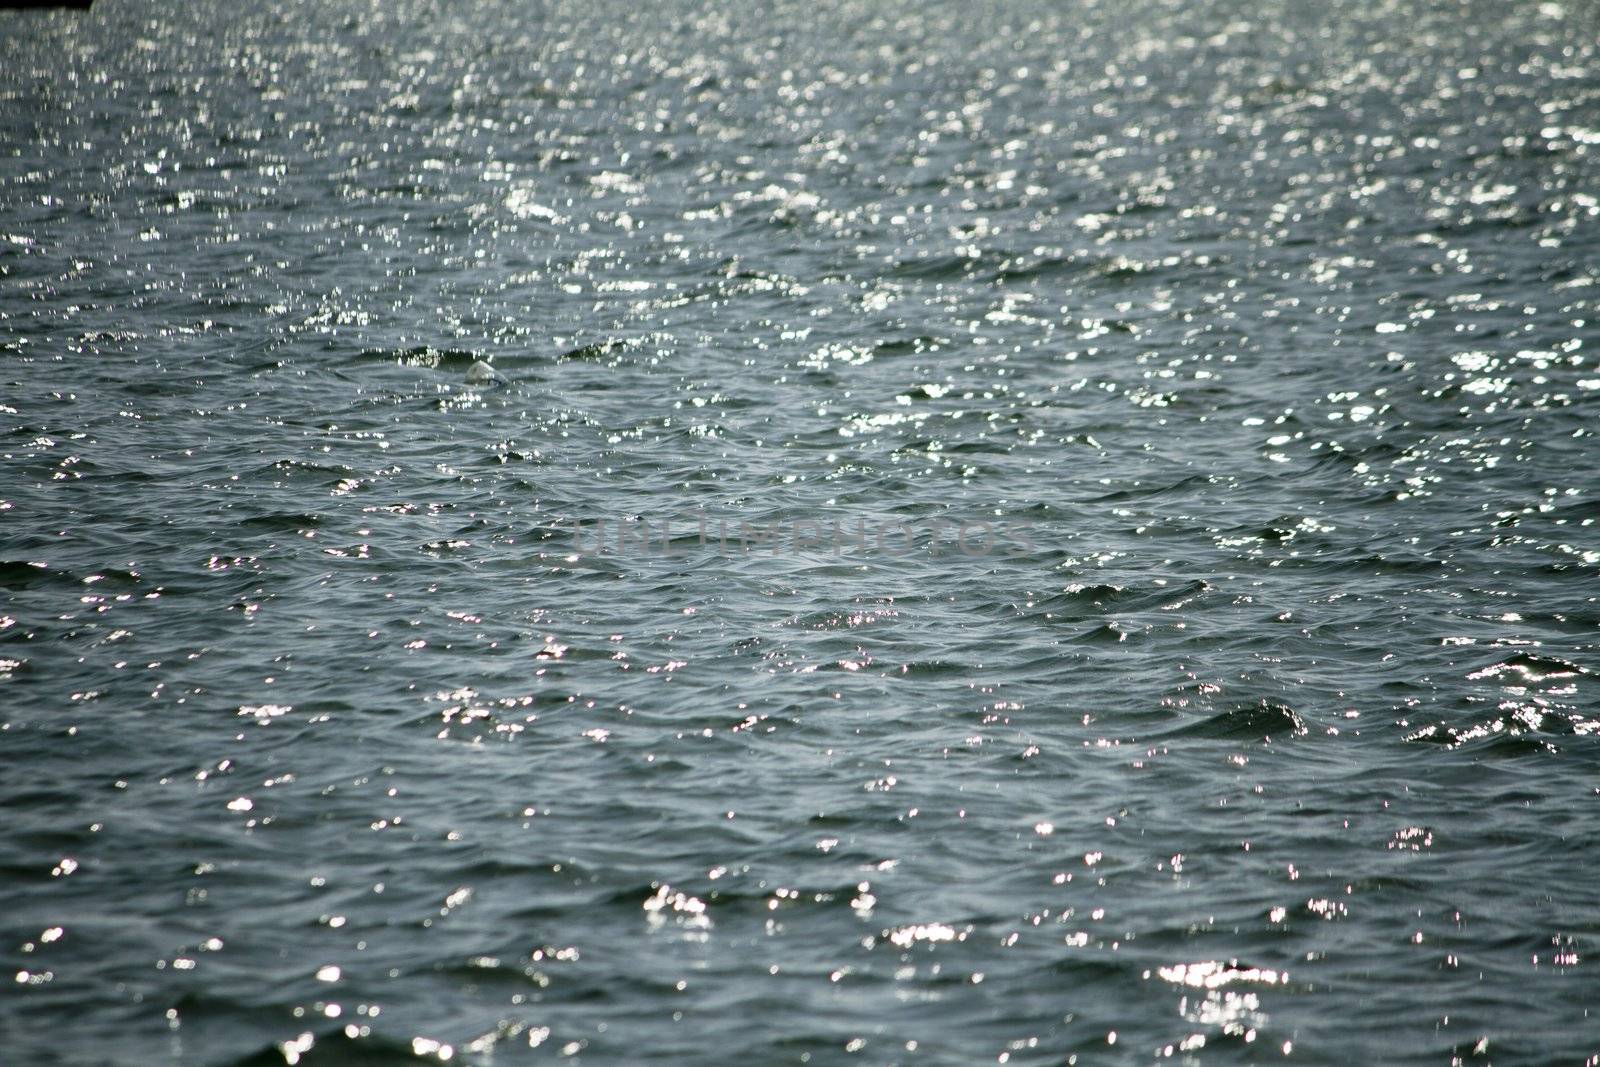 View of a section of the sea with tiny waves and shine from the sun.